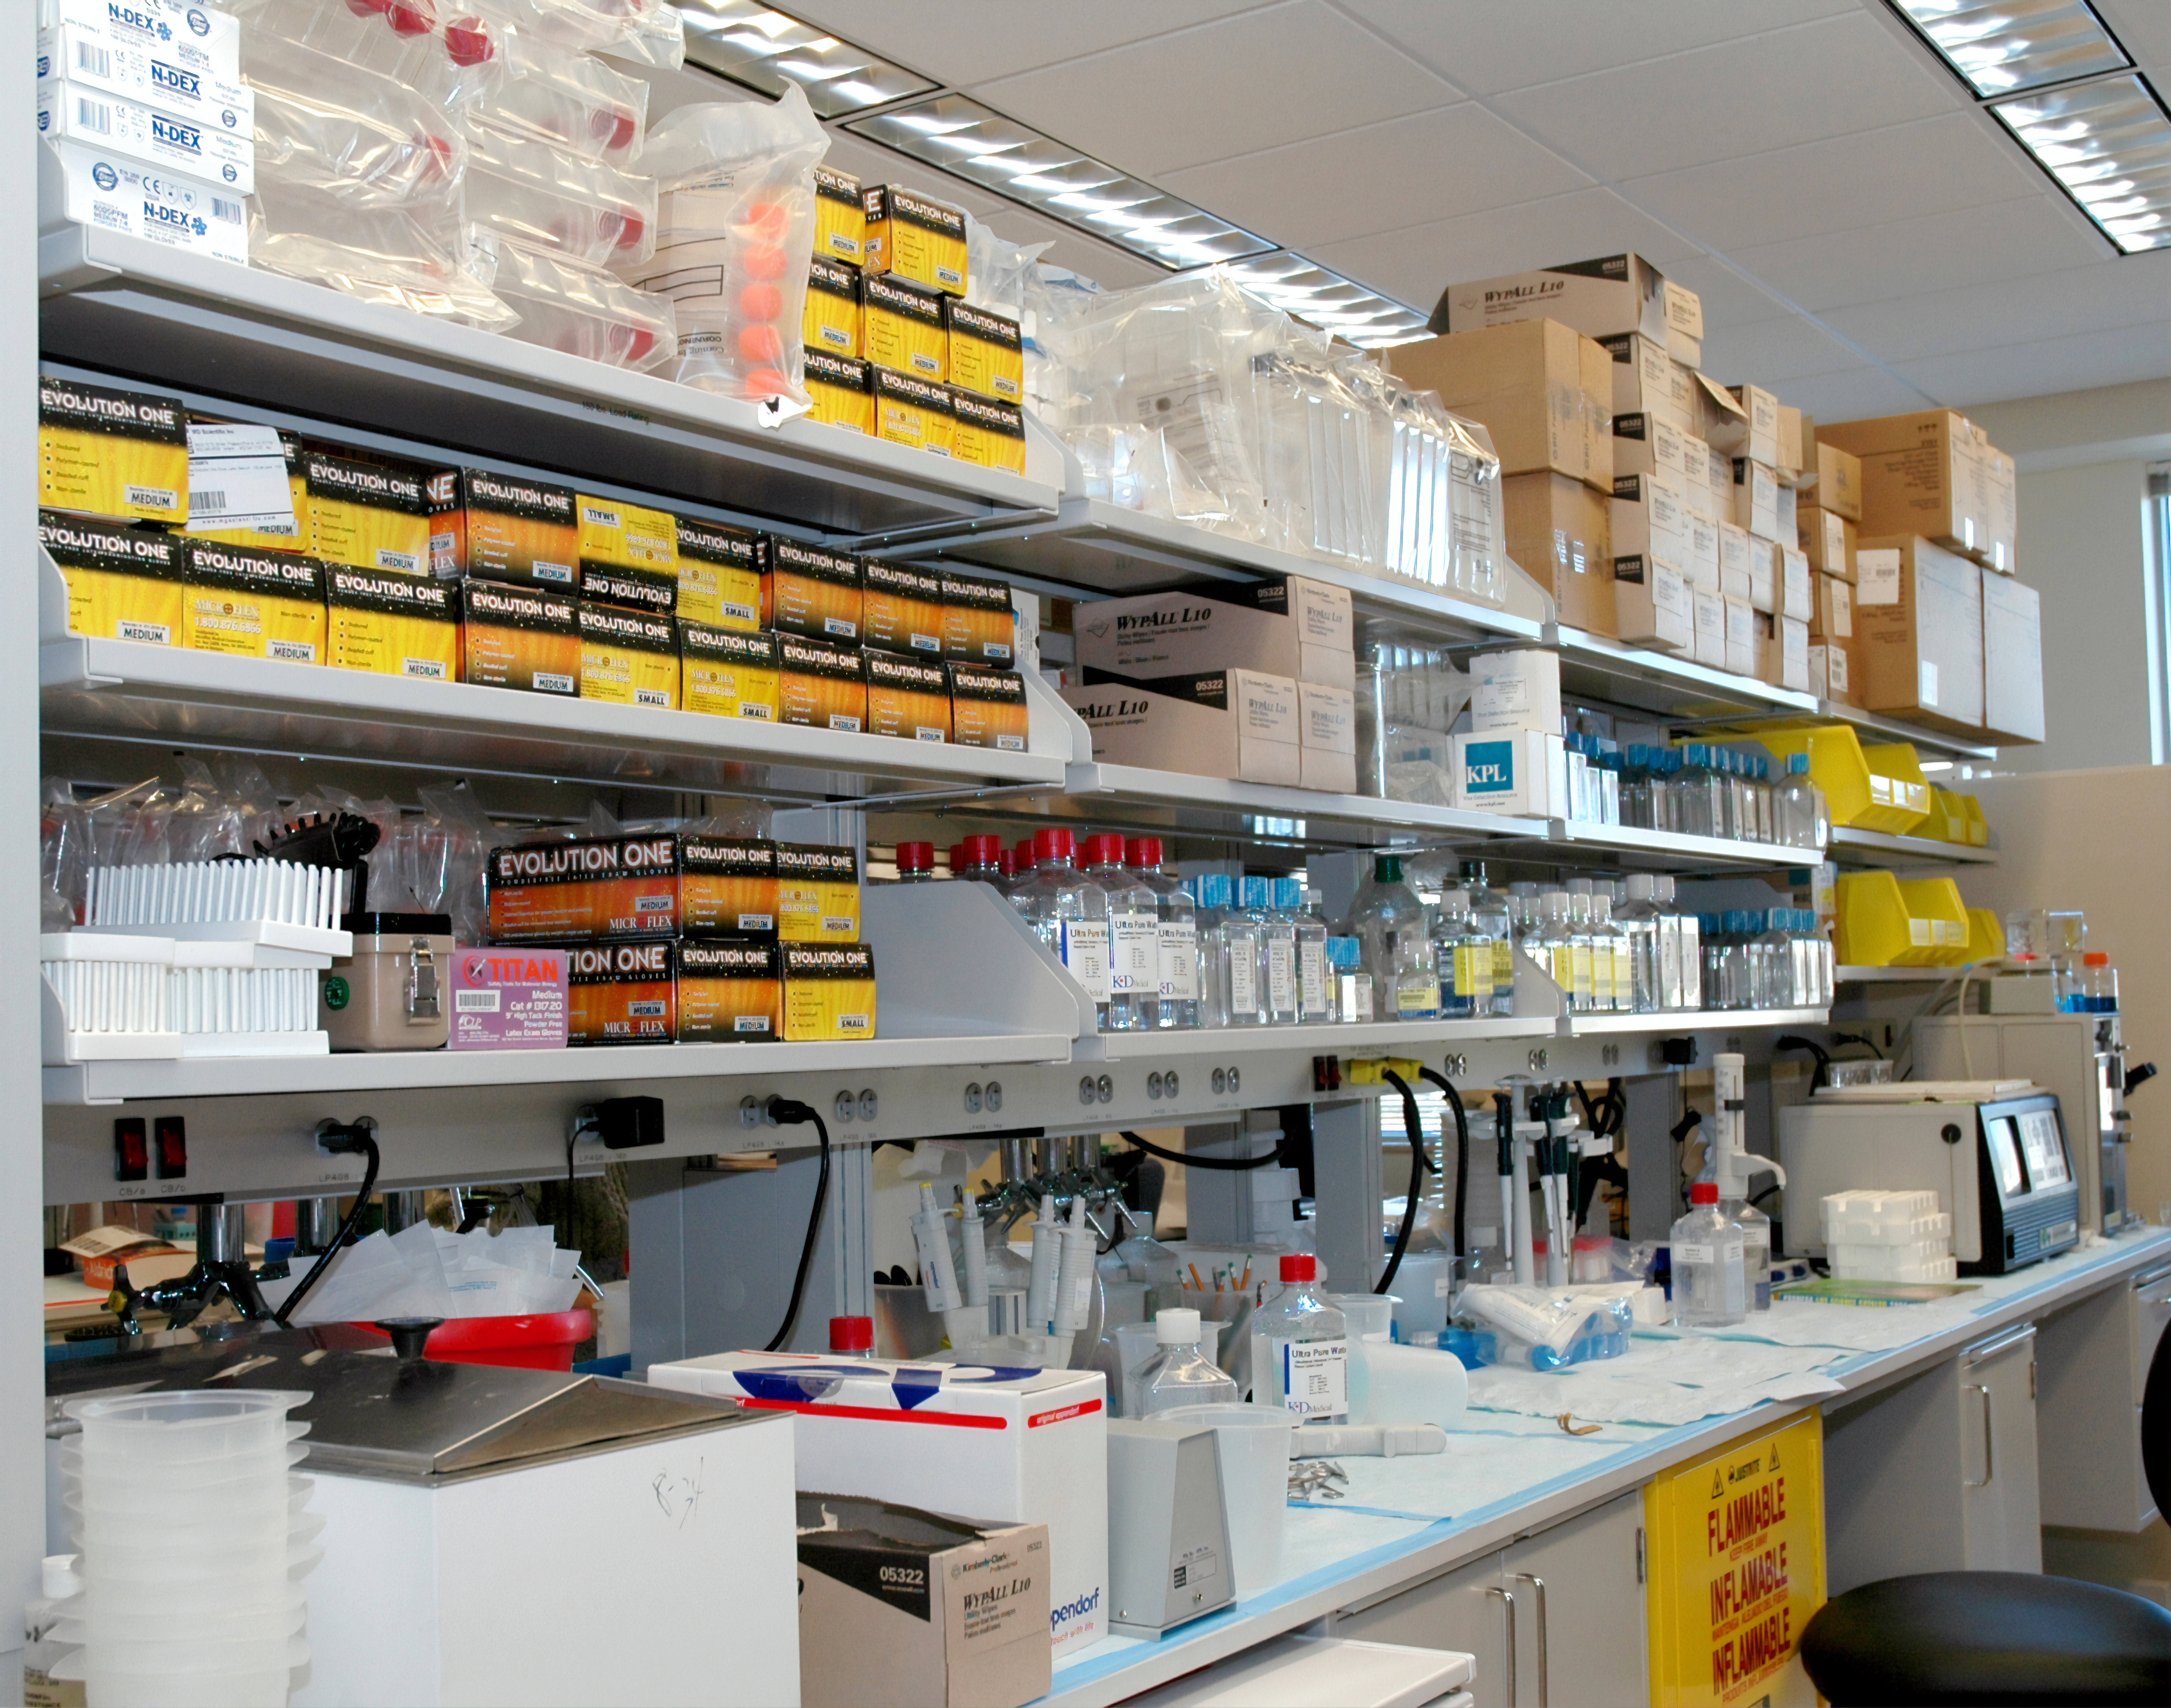 bottles and jars of chemicals on shelves in a lab.